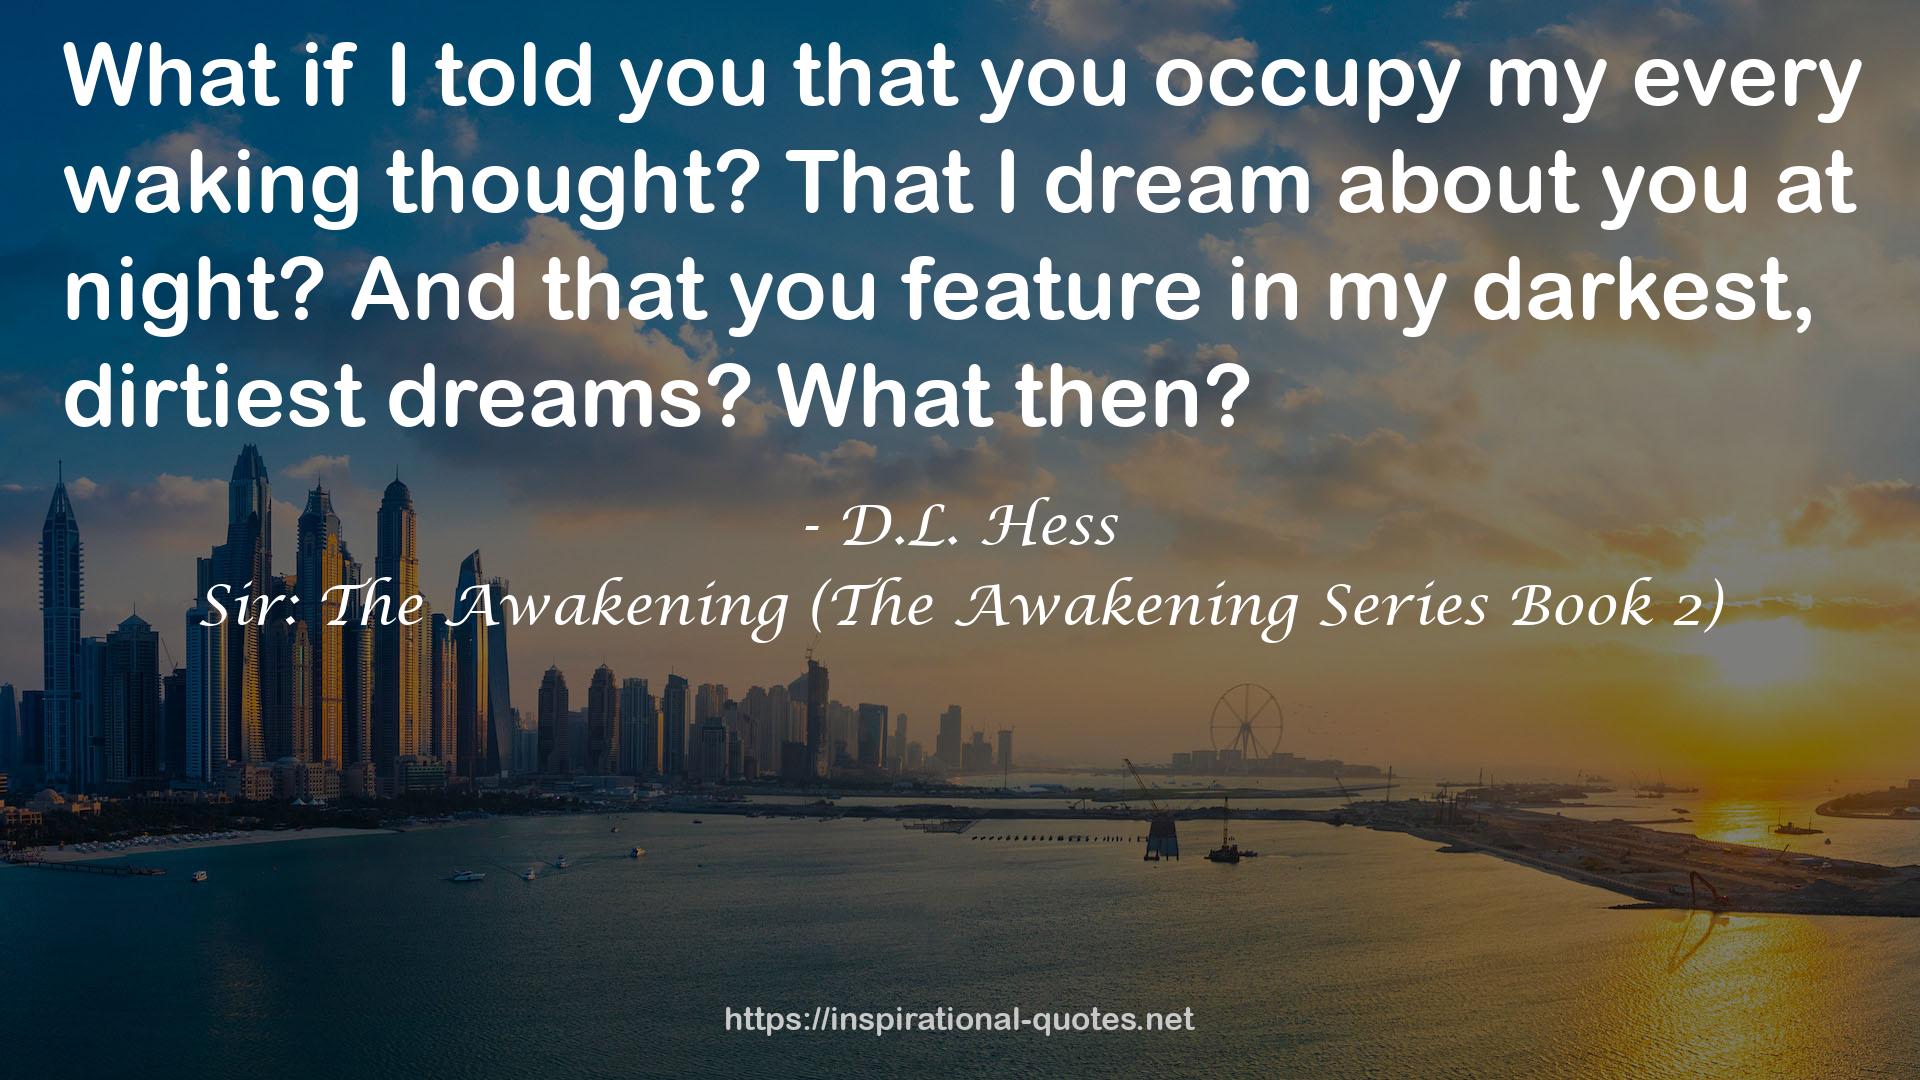 D.L. Hess QUOTES